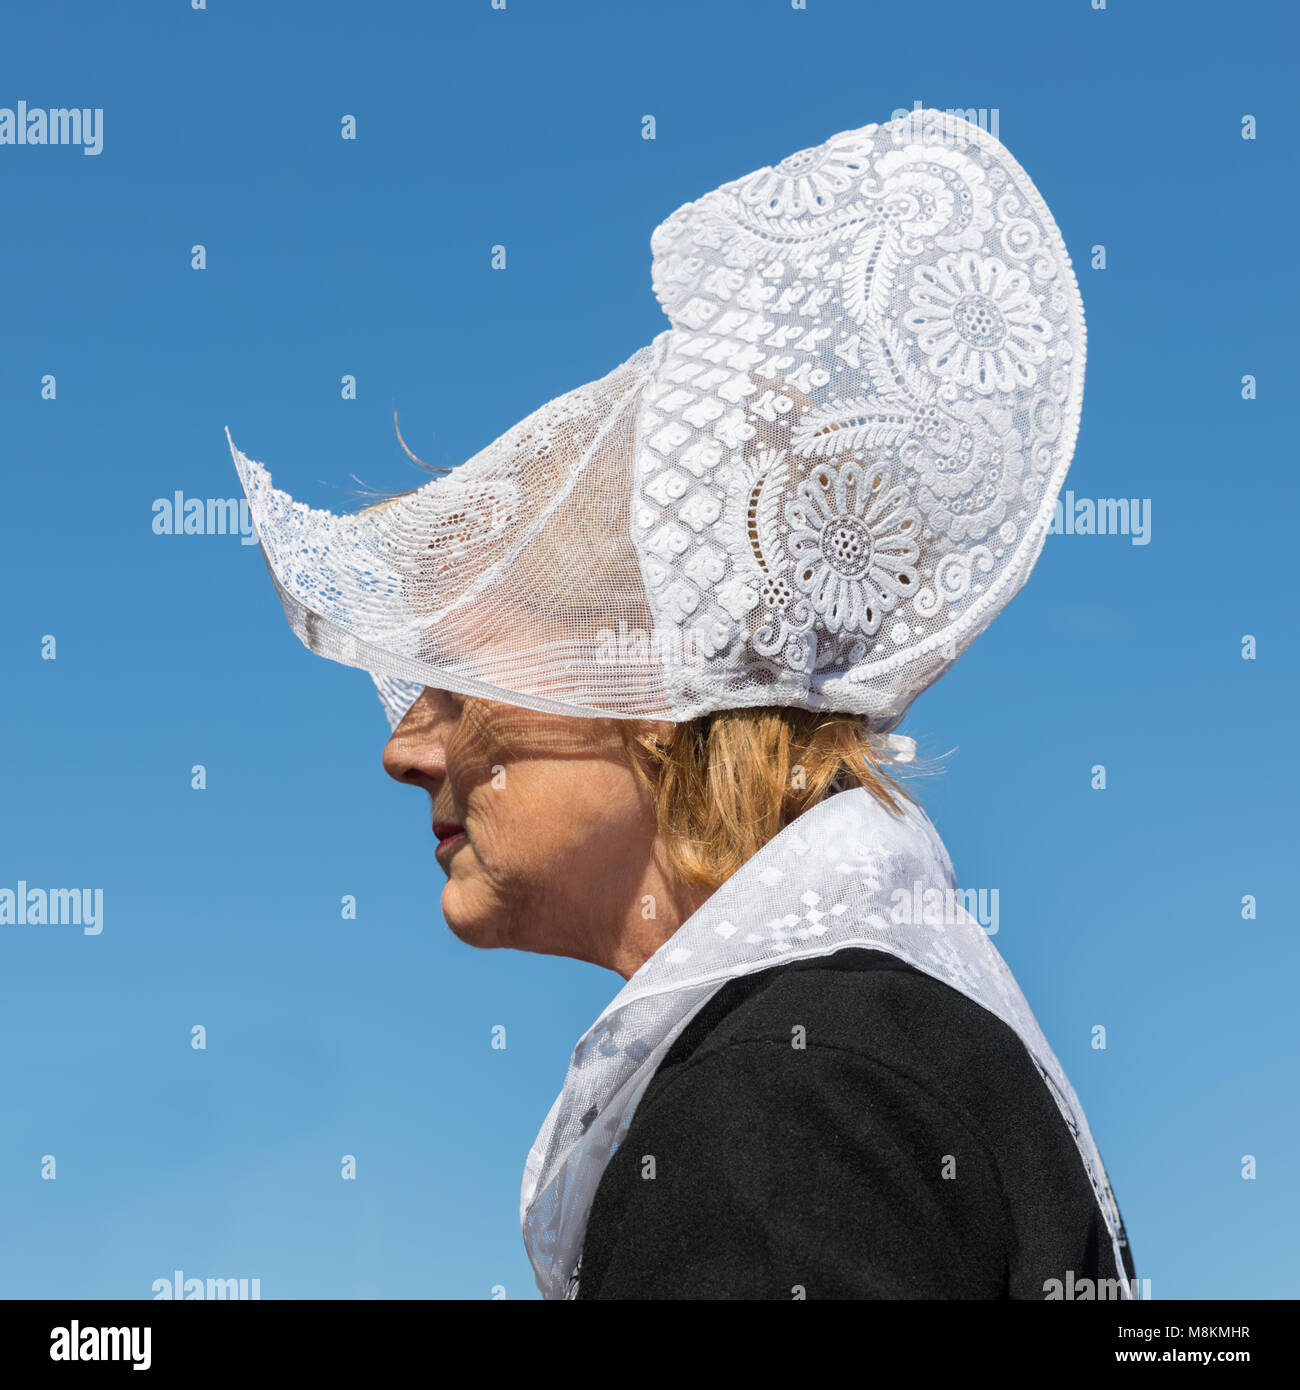 Dutch woman with traditional clothing and headgear at local fair Stock Photo